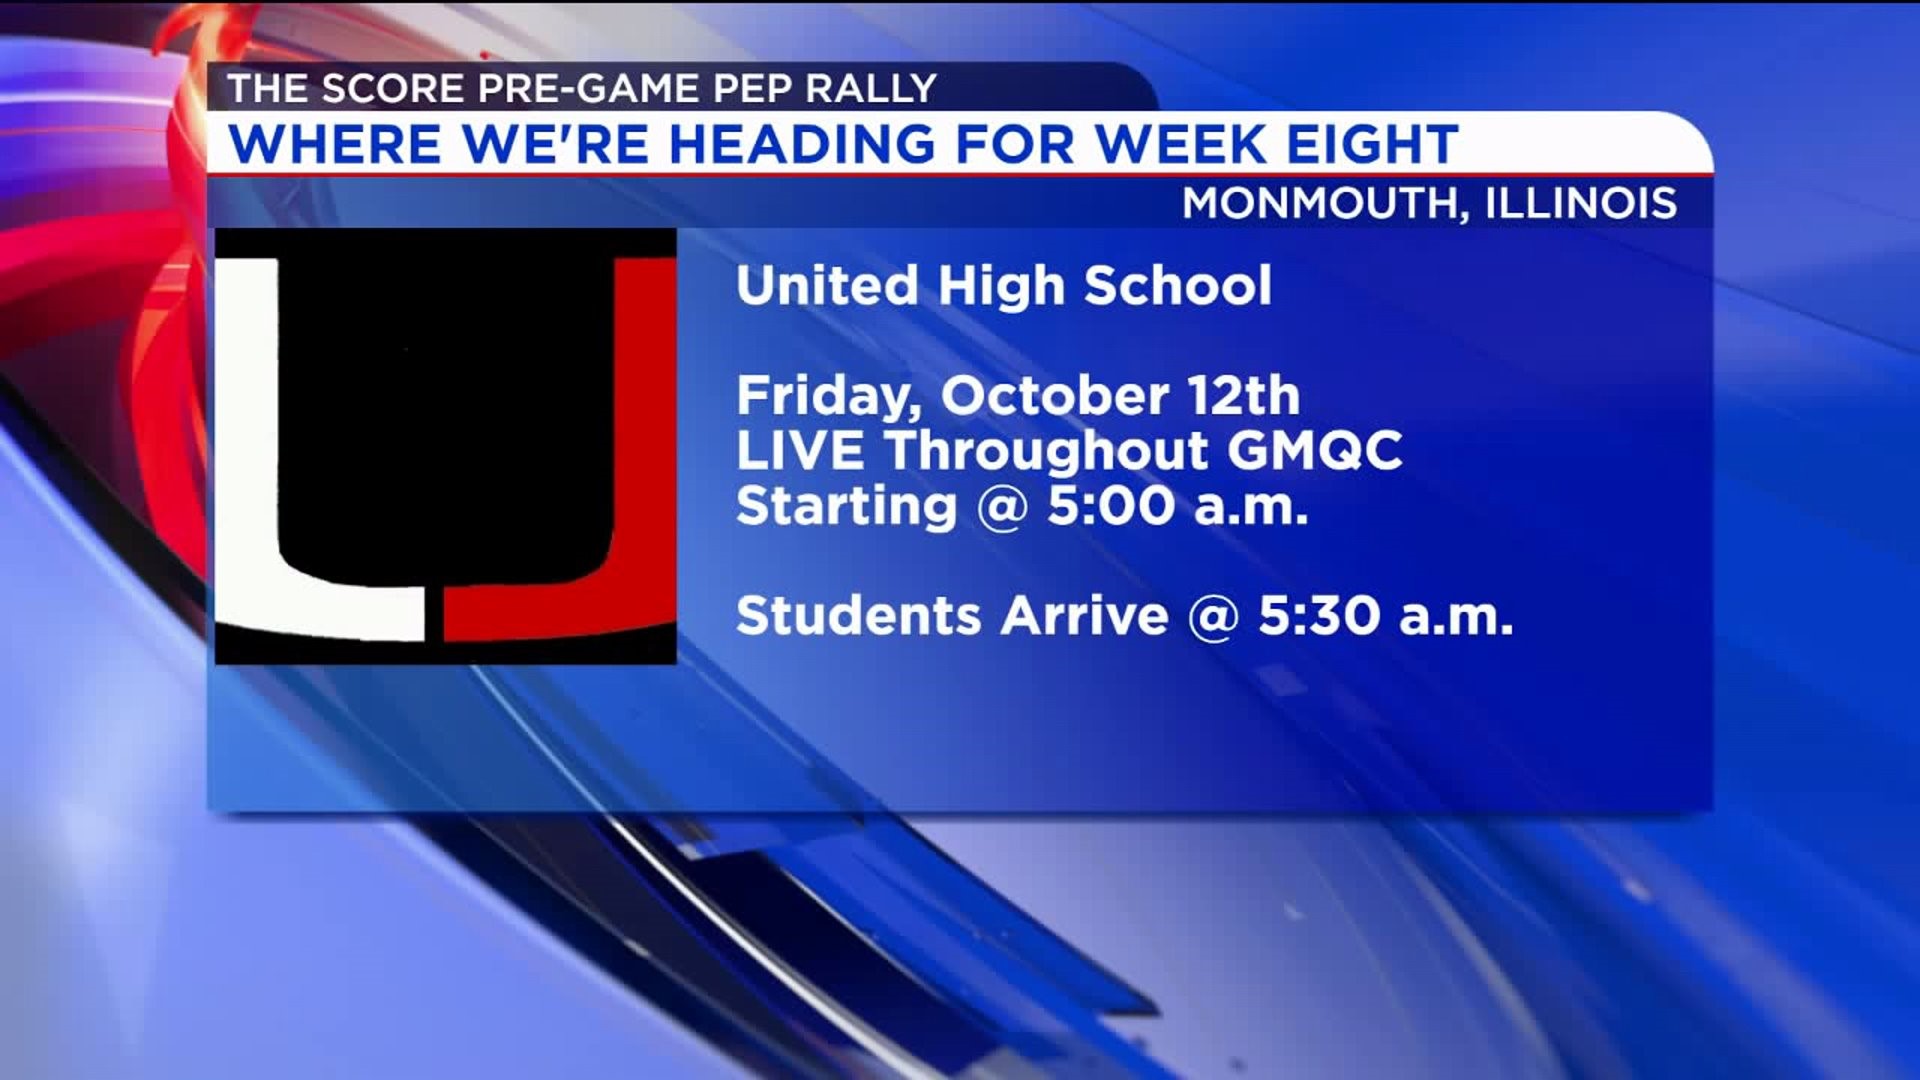 Where We`re Headed For Week Eight of The Score Pre-Game Pep Rally